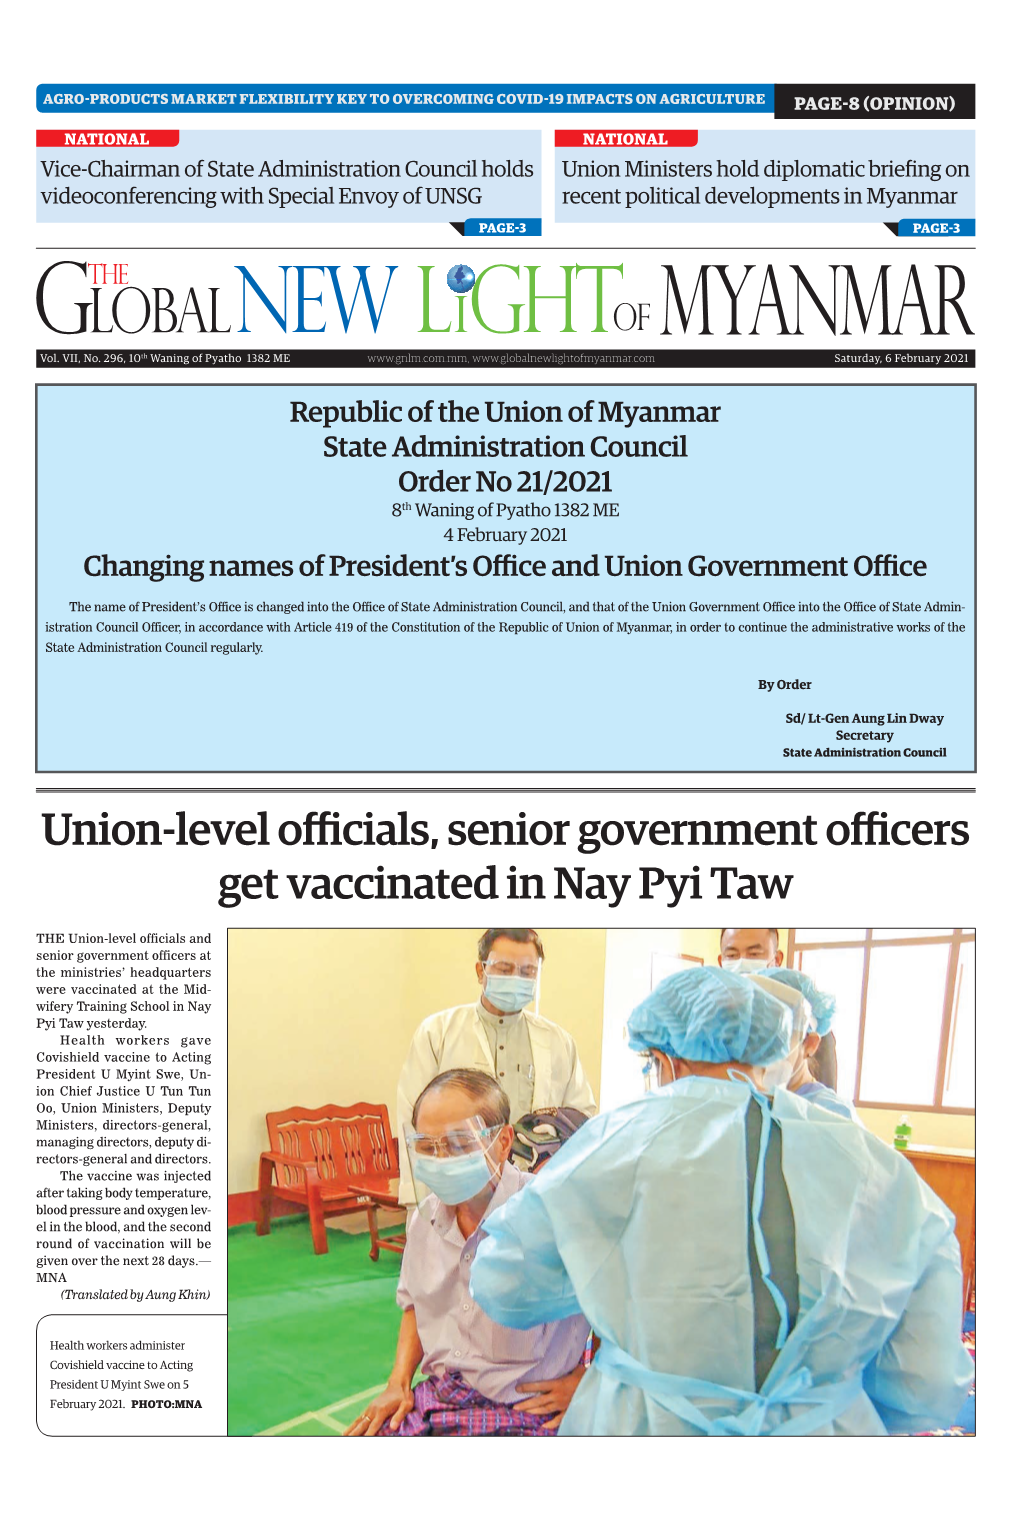 Union-Level Officials, Senior Government Officers Get Vaccinated in Nay Pyi Taw